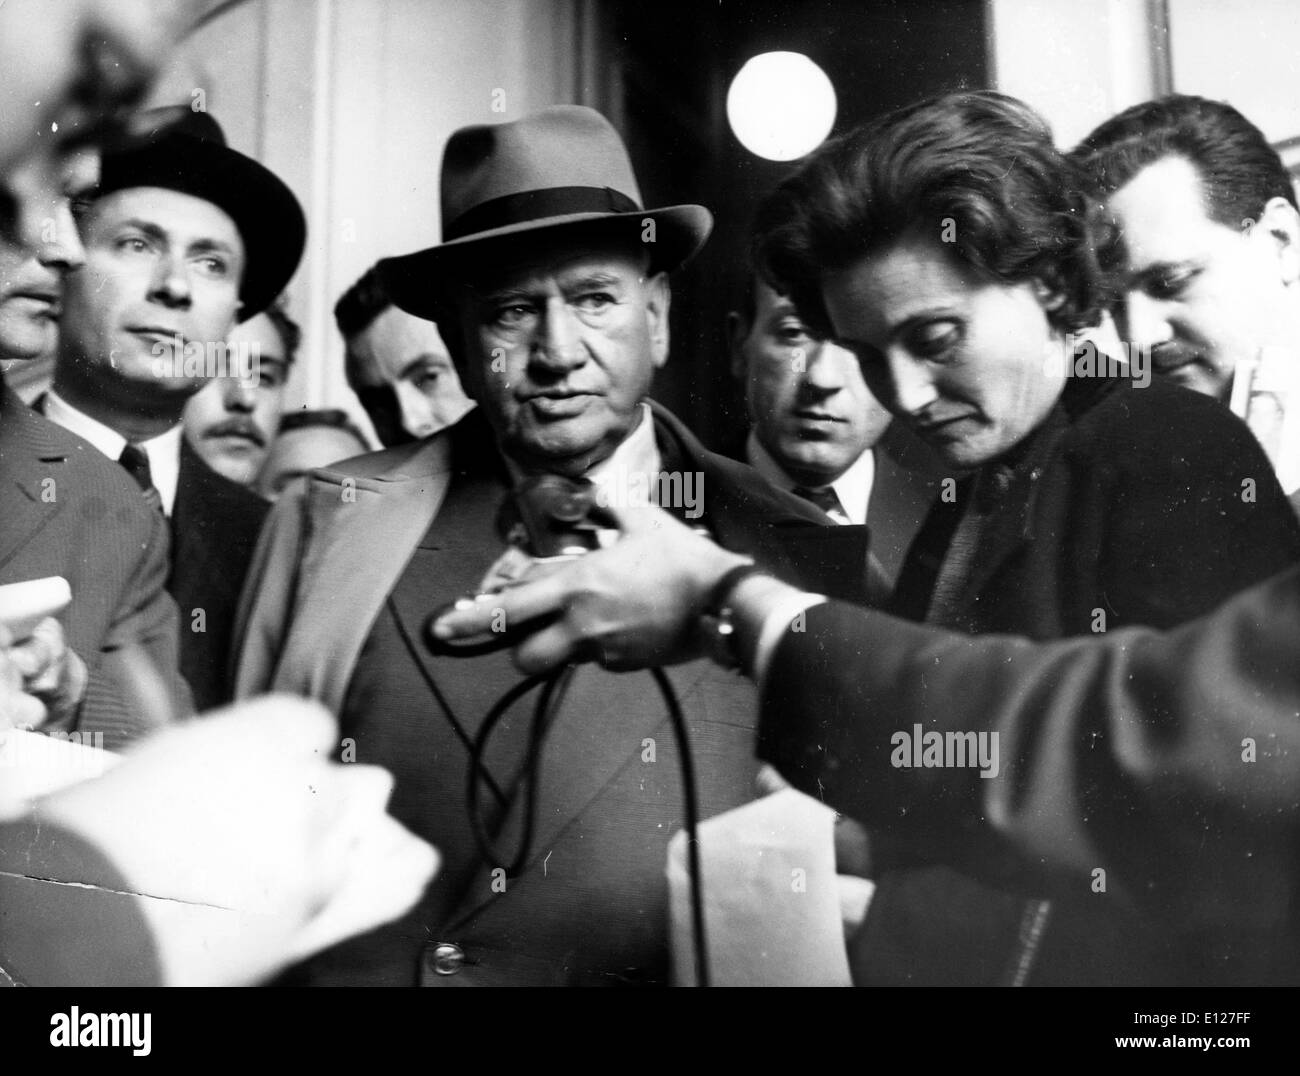 Apr 01, 2009 - London, England, United Kingdom - EDOUARD DALADIER (18 June 1884 - 10 October 1970) was a French Radical politician, and Prime Minister of France at the start of the Second World War. (Credit Image: KEYSTONE Pictures USA/ZUMAPRESS.com) Stock Photo